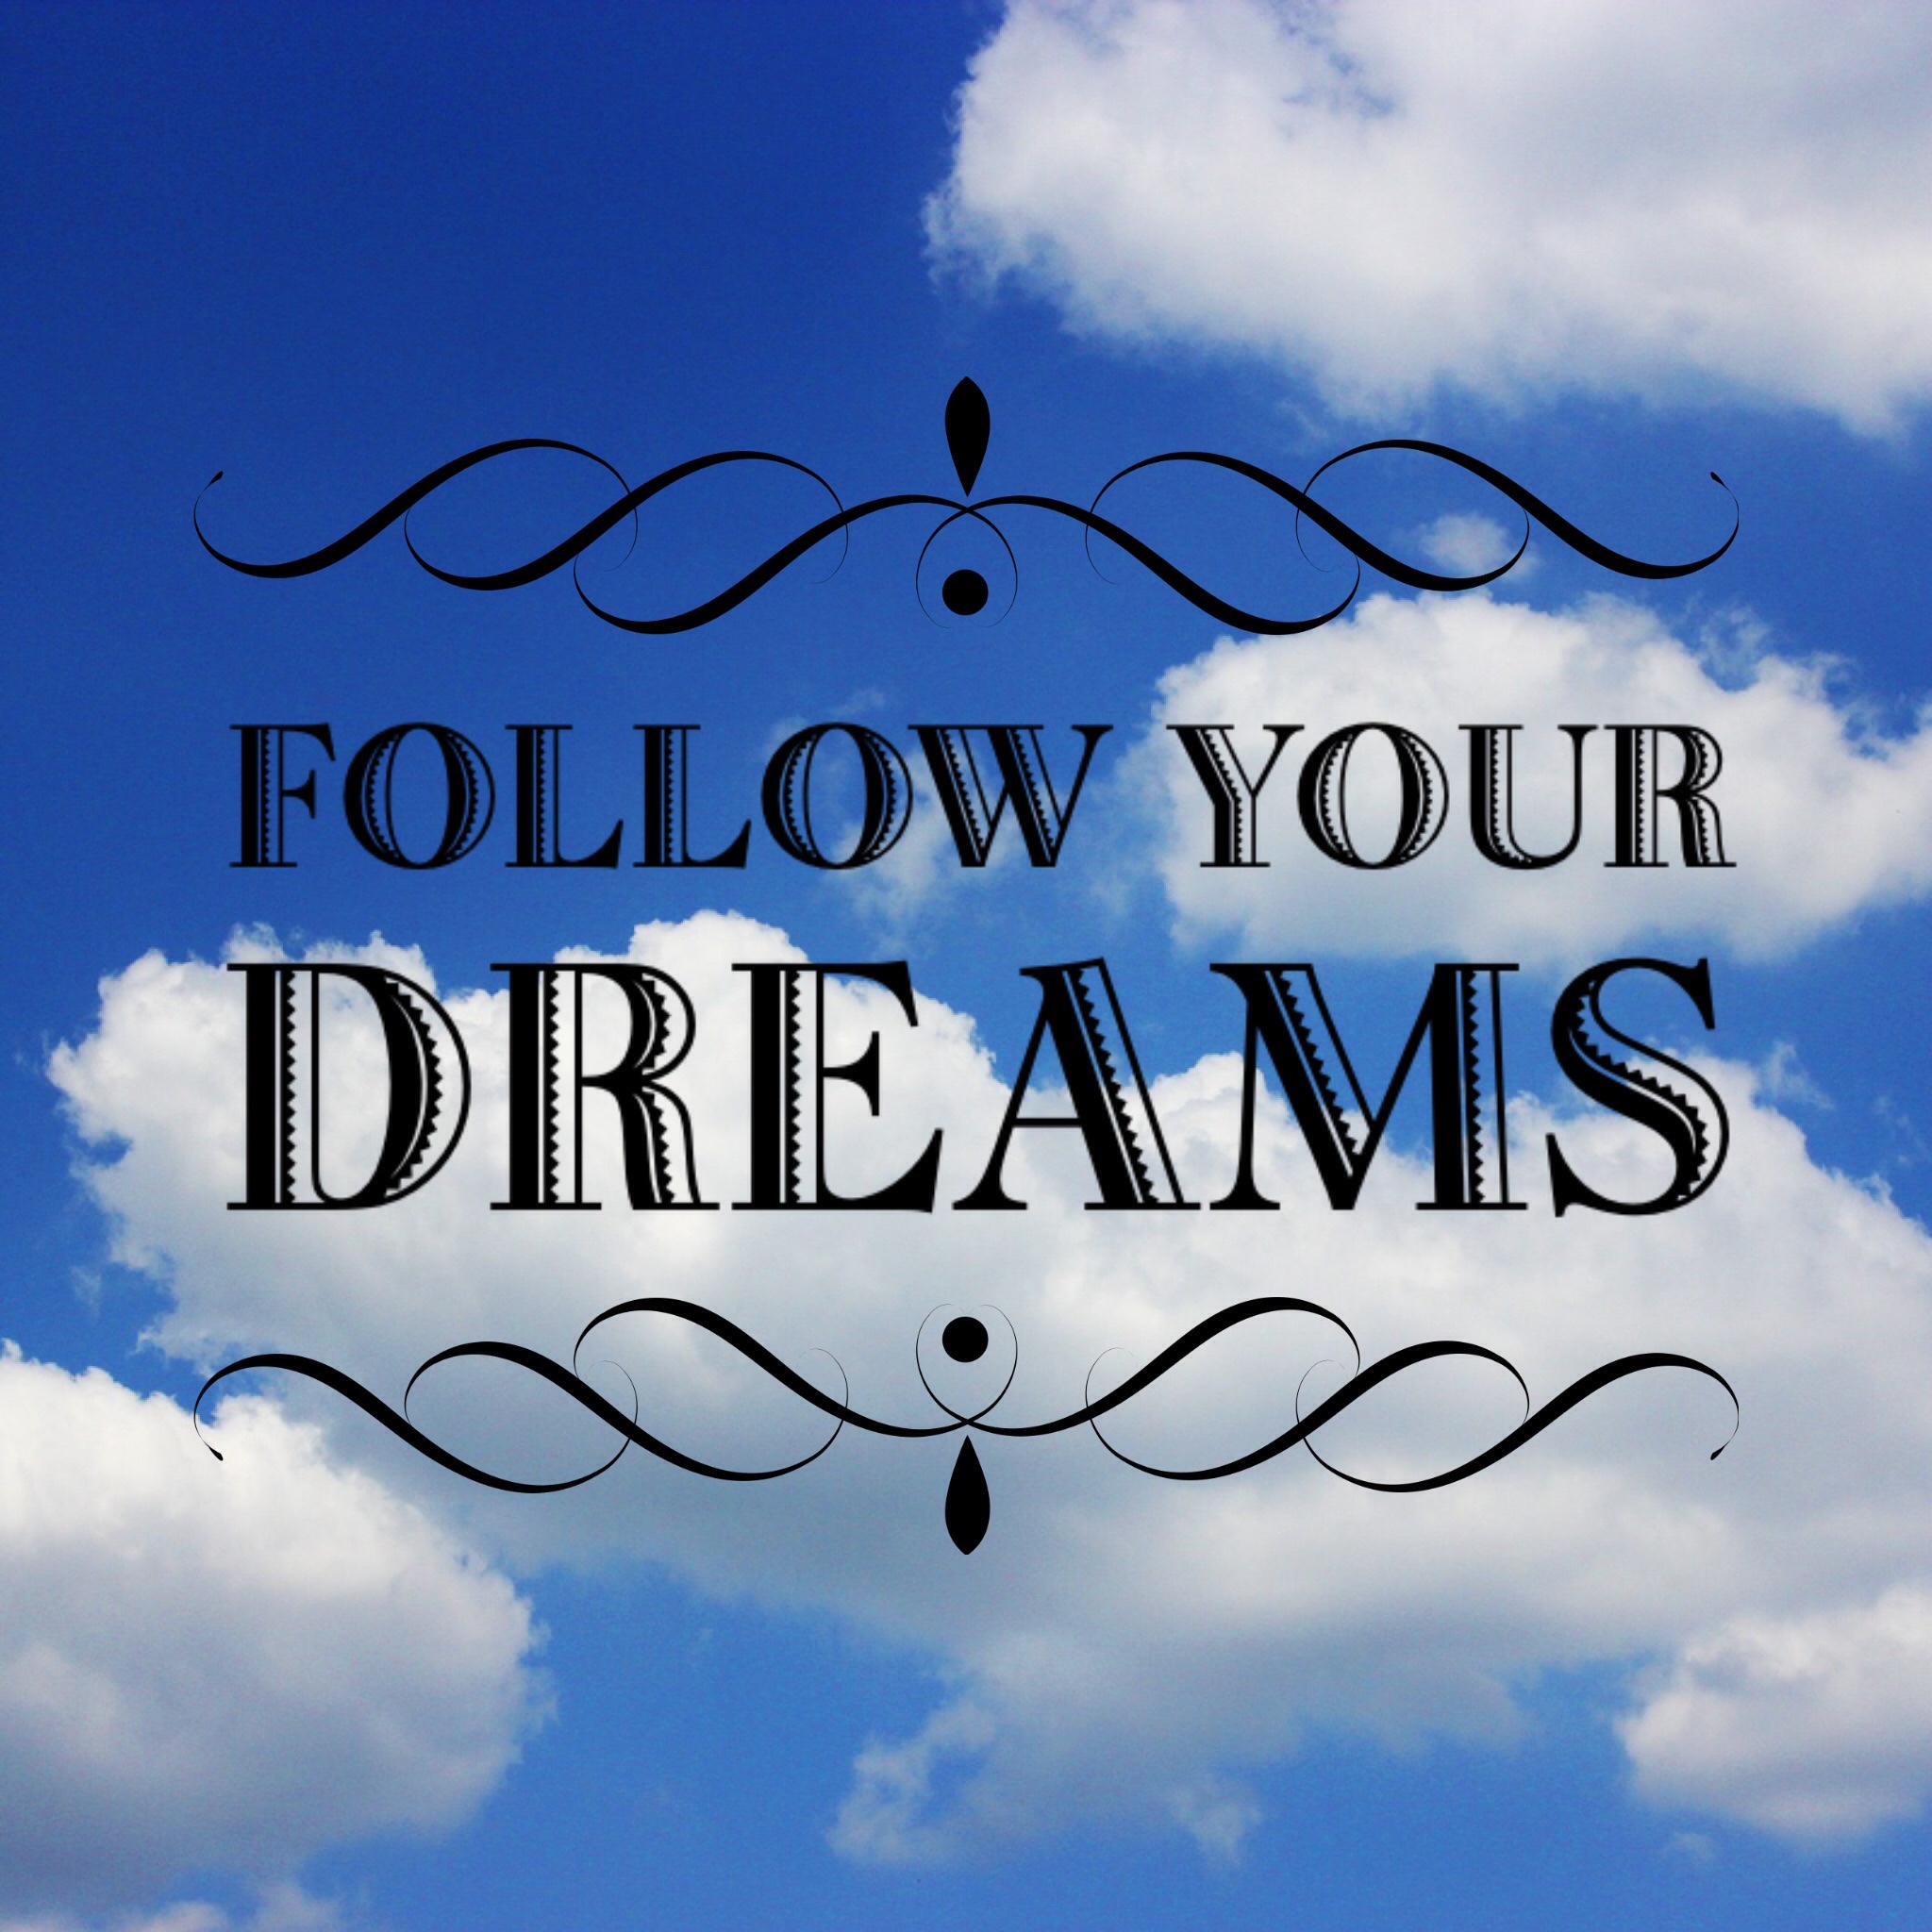 To Follow Your Dreams